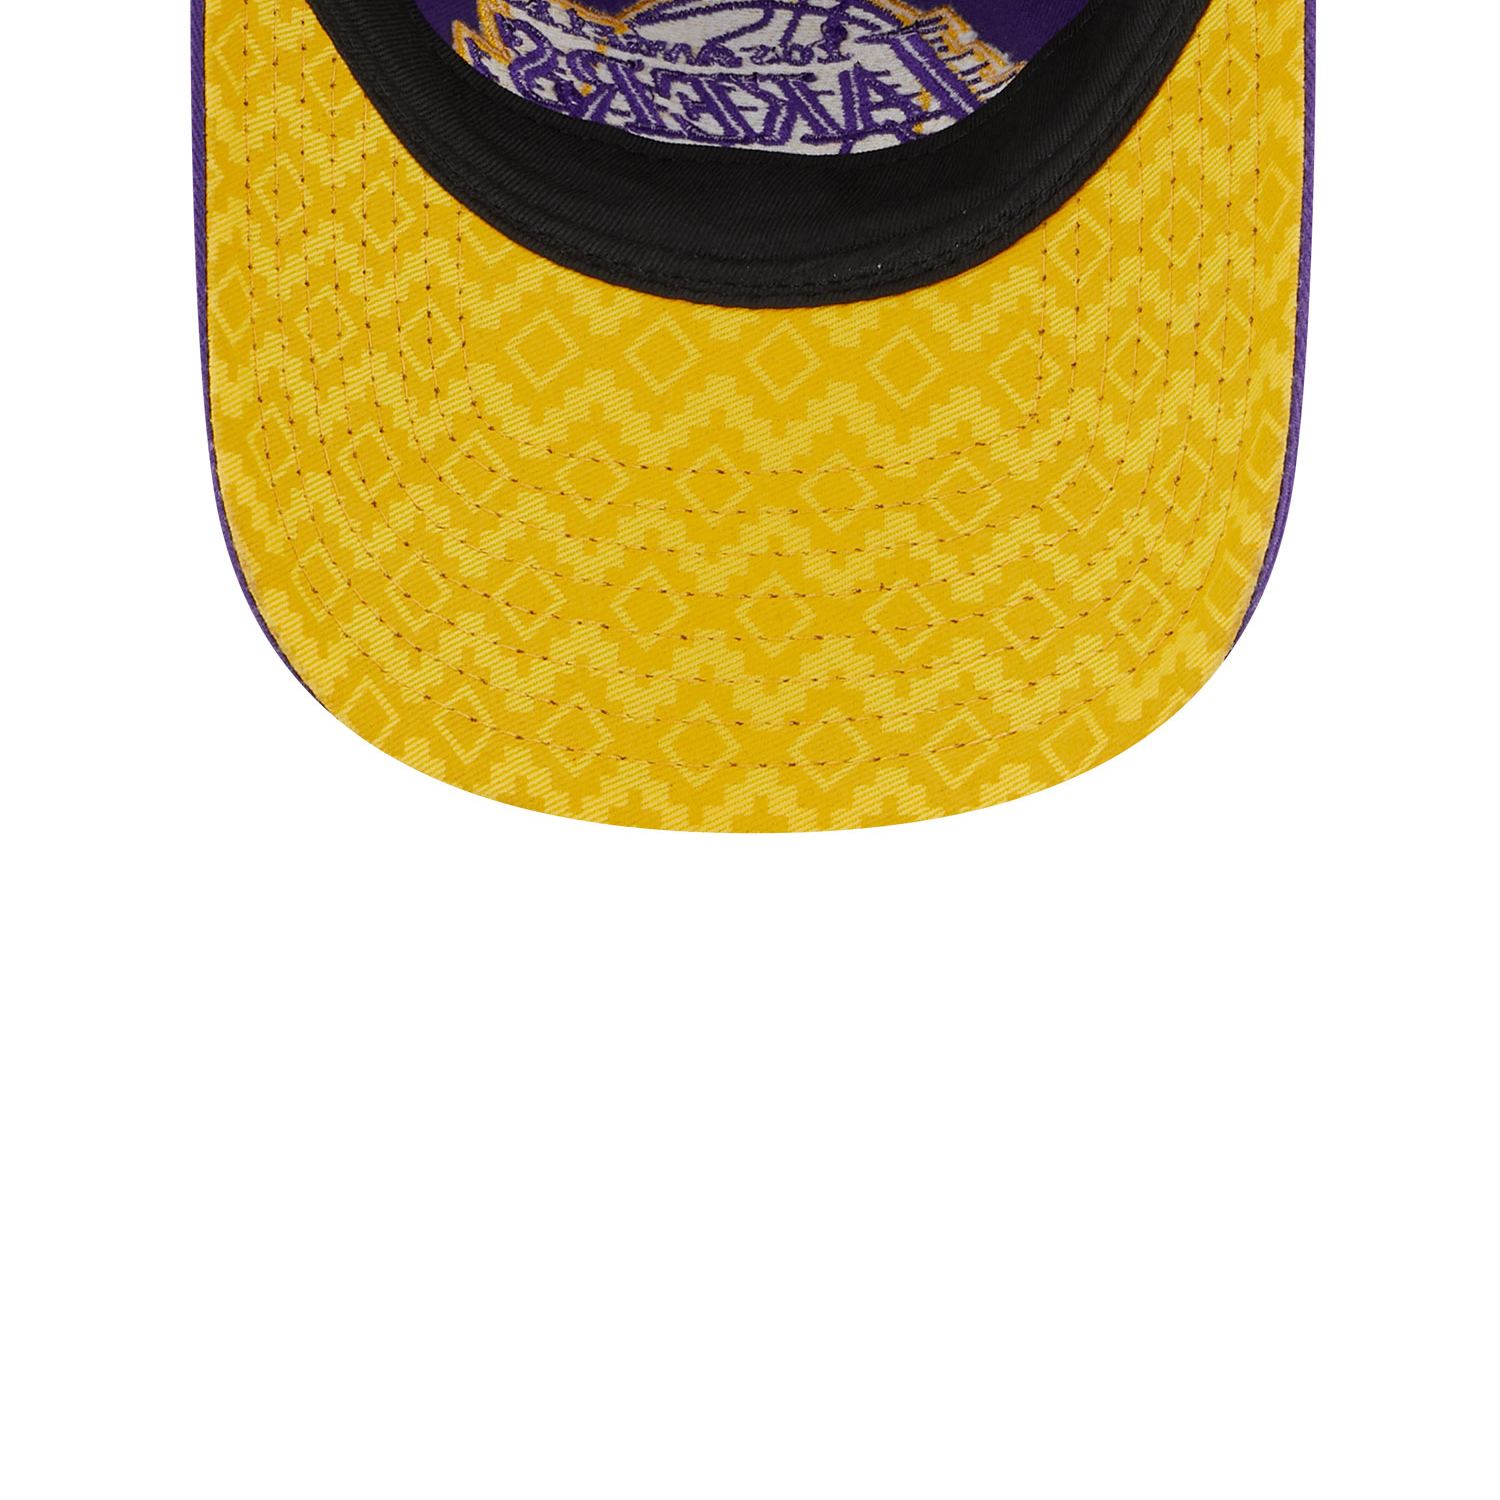 LA Lakers style – upperupper